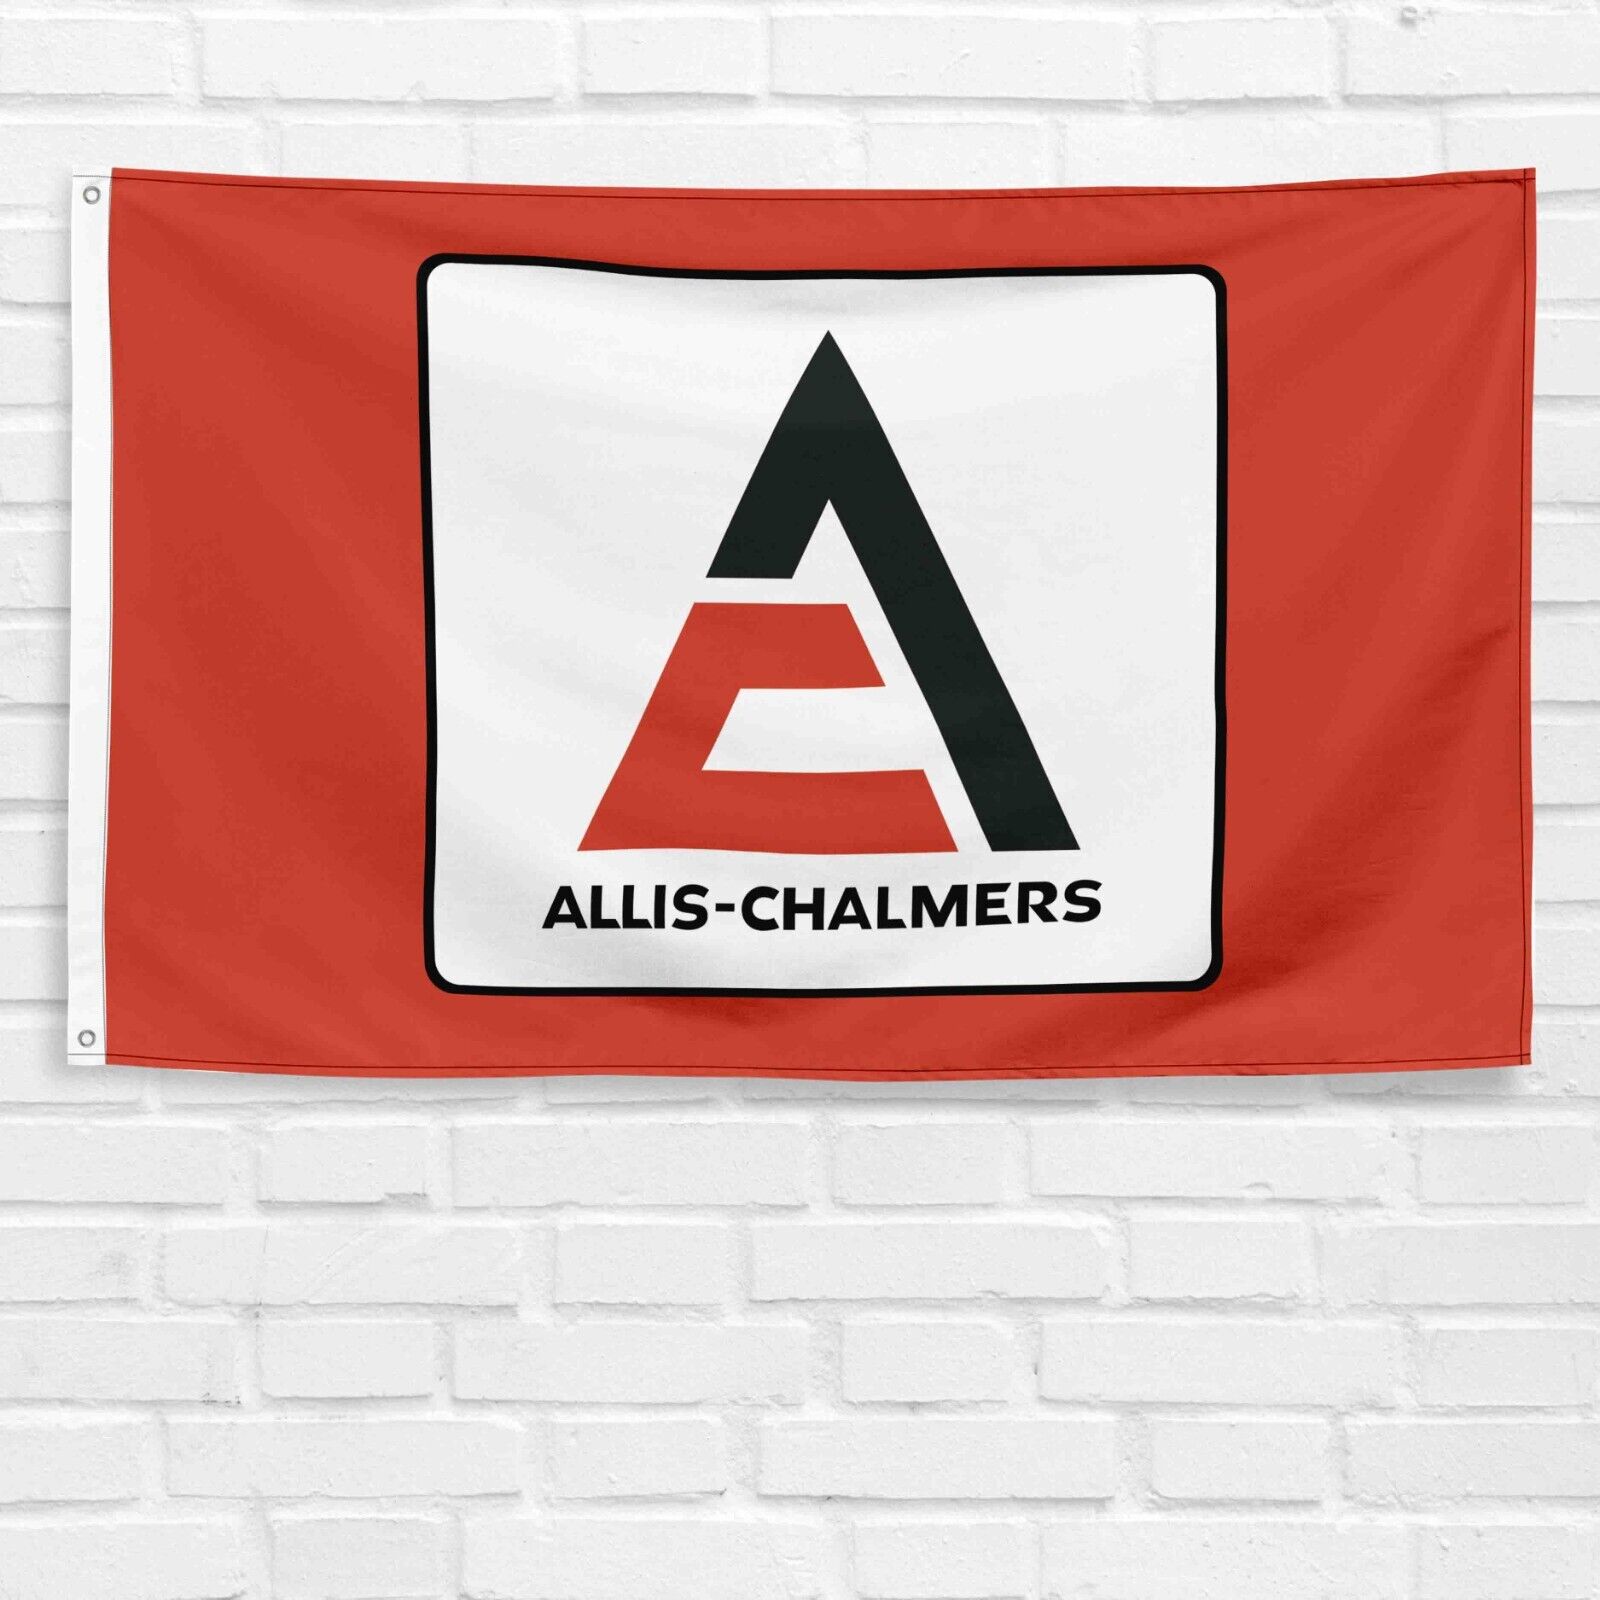 For Allis-Chalmers 3x5 ft Banner Tractor Farm Equipment Wall Decor Sign Flag